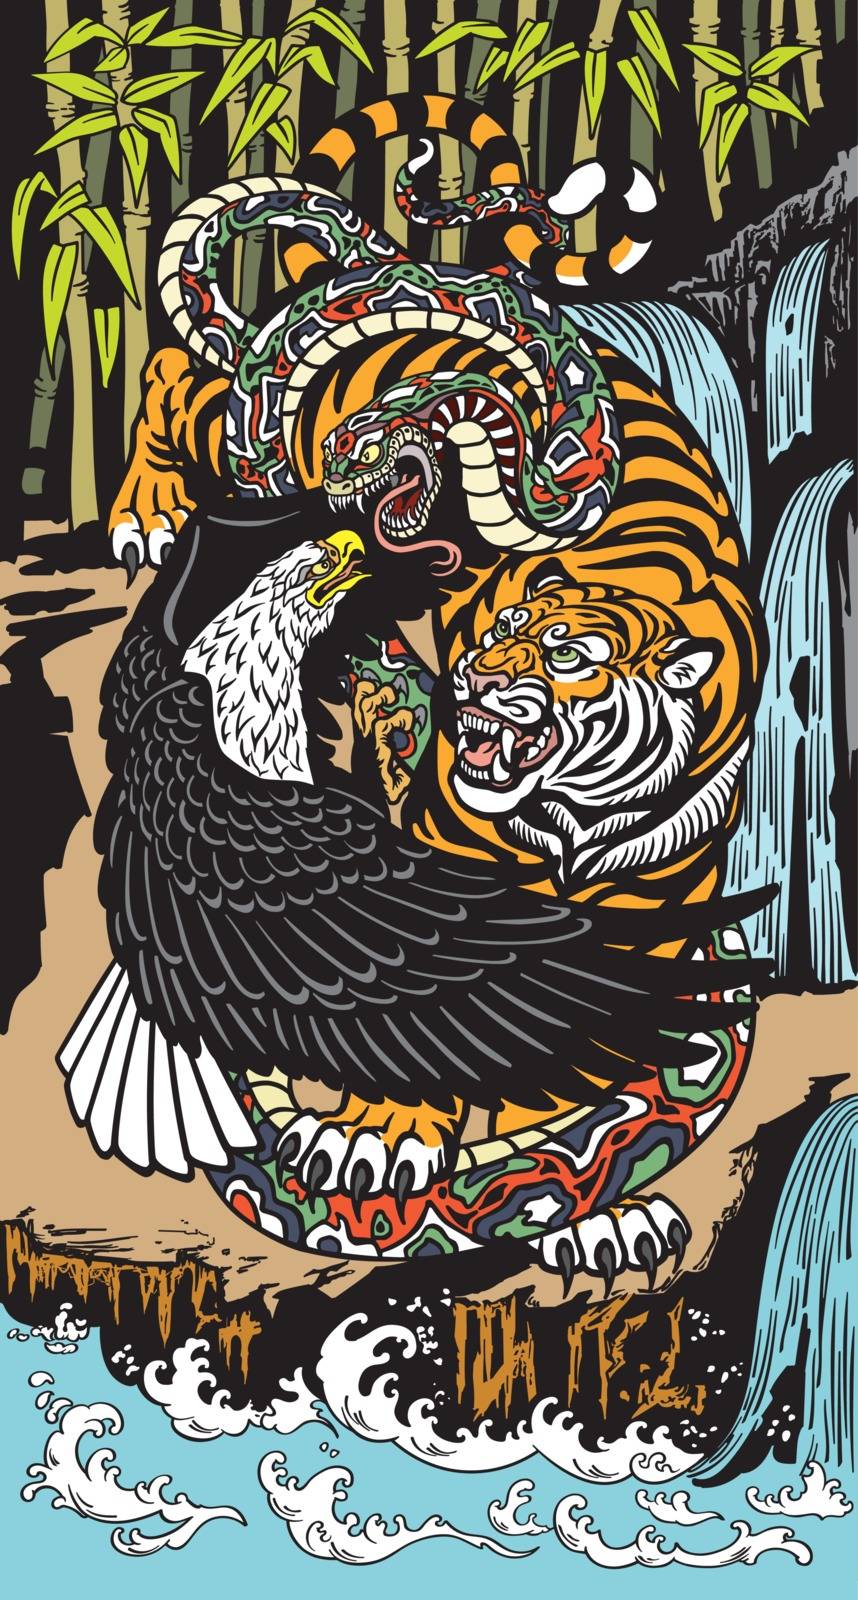 tiger eagle and snake fighting. Wild symbolic animals in a landscape. Graphic style vector illustration